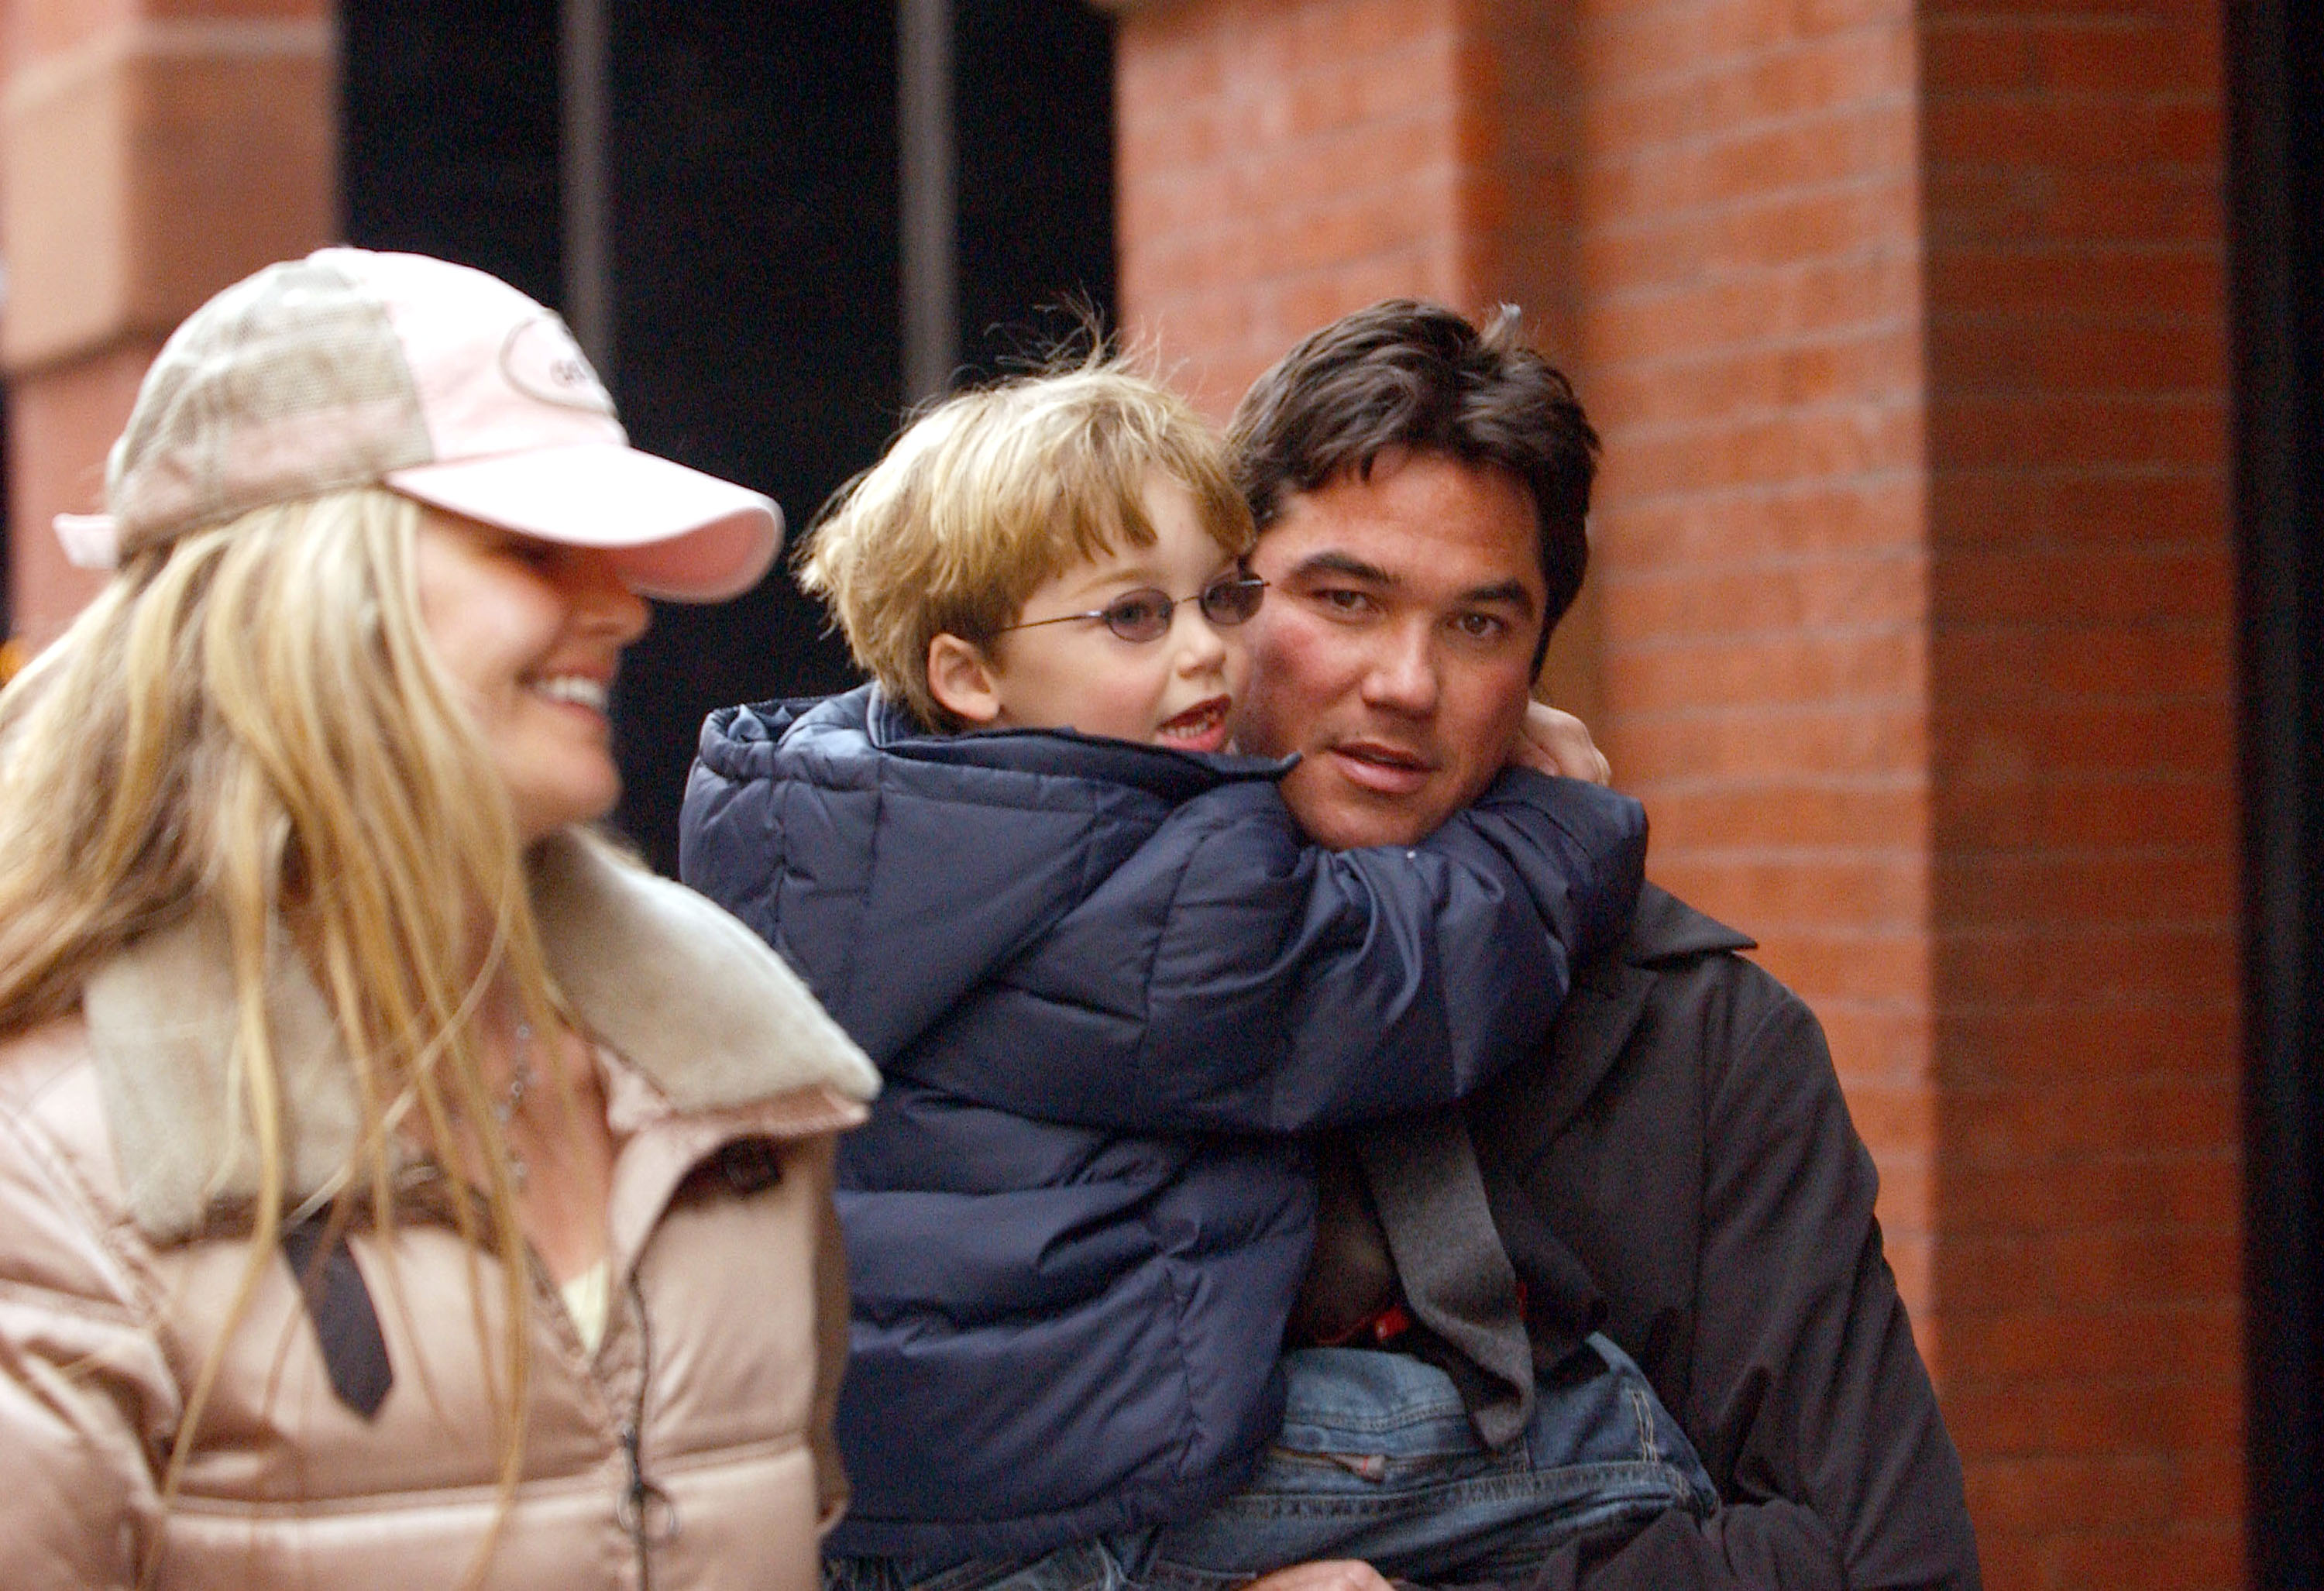 Dean Cain, Samantha Torres, and son Christopher at West Village in New York City, on March 17, 2005 | Source: Getty Images